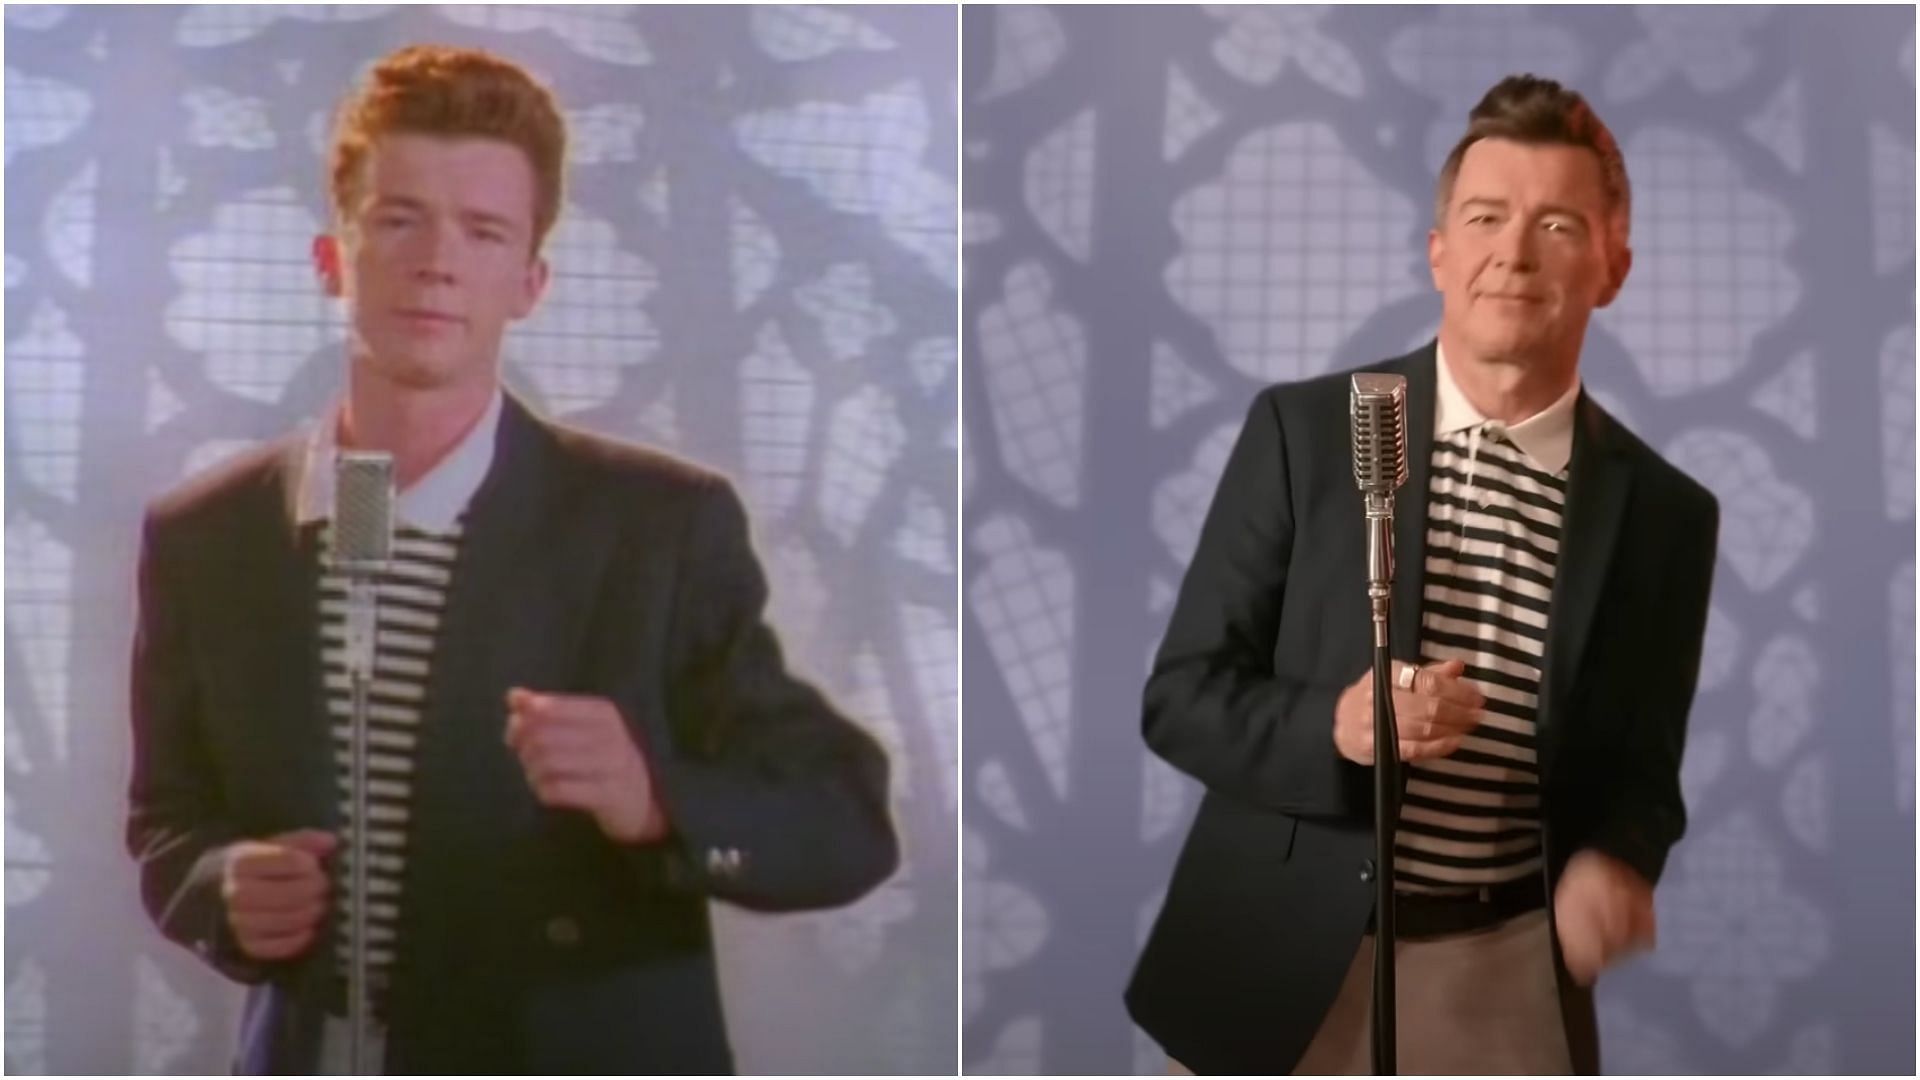 Rick Astley in the original Never Gonna Give You Up video from 1987 and the recent ad. (Screenshots via YouTube)